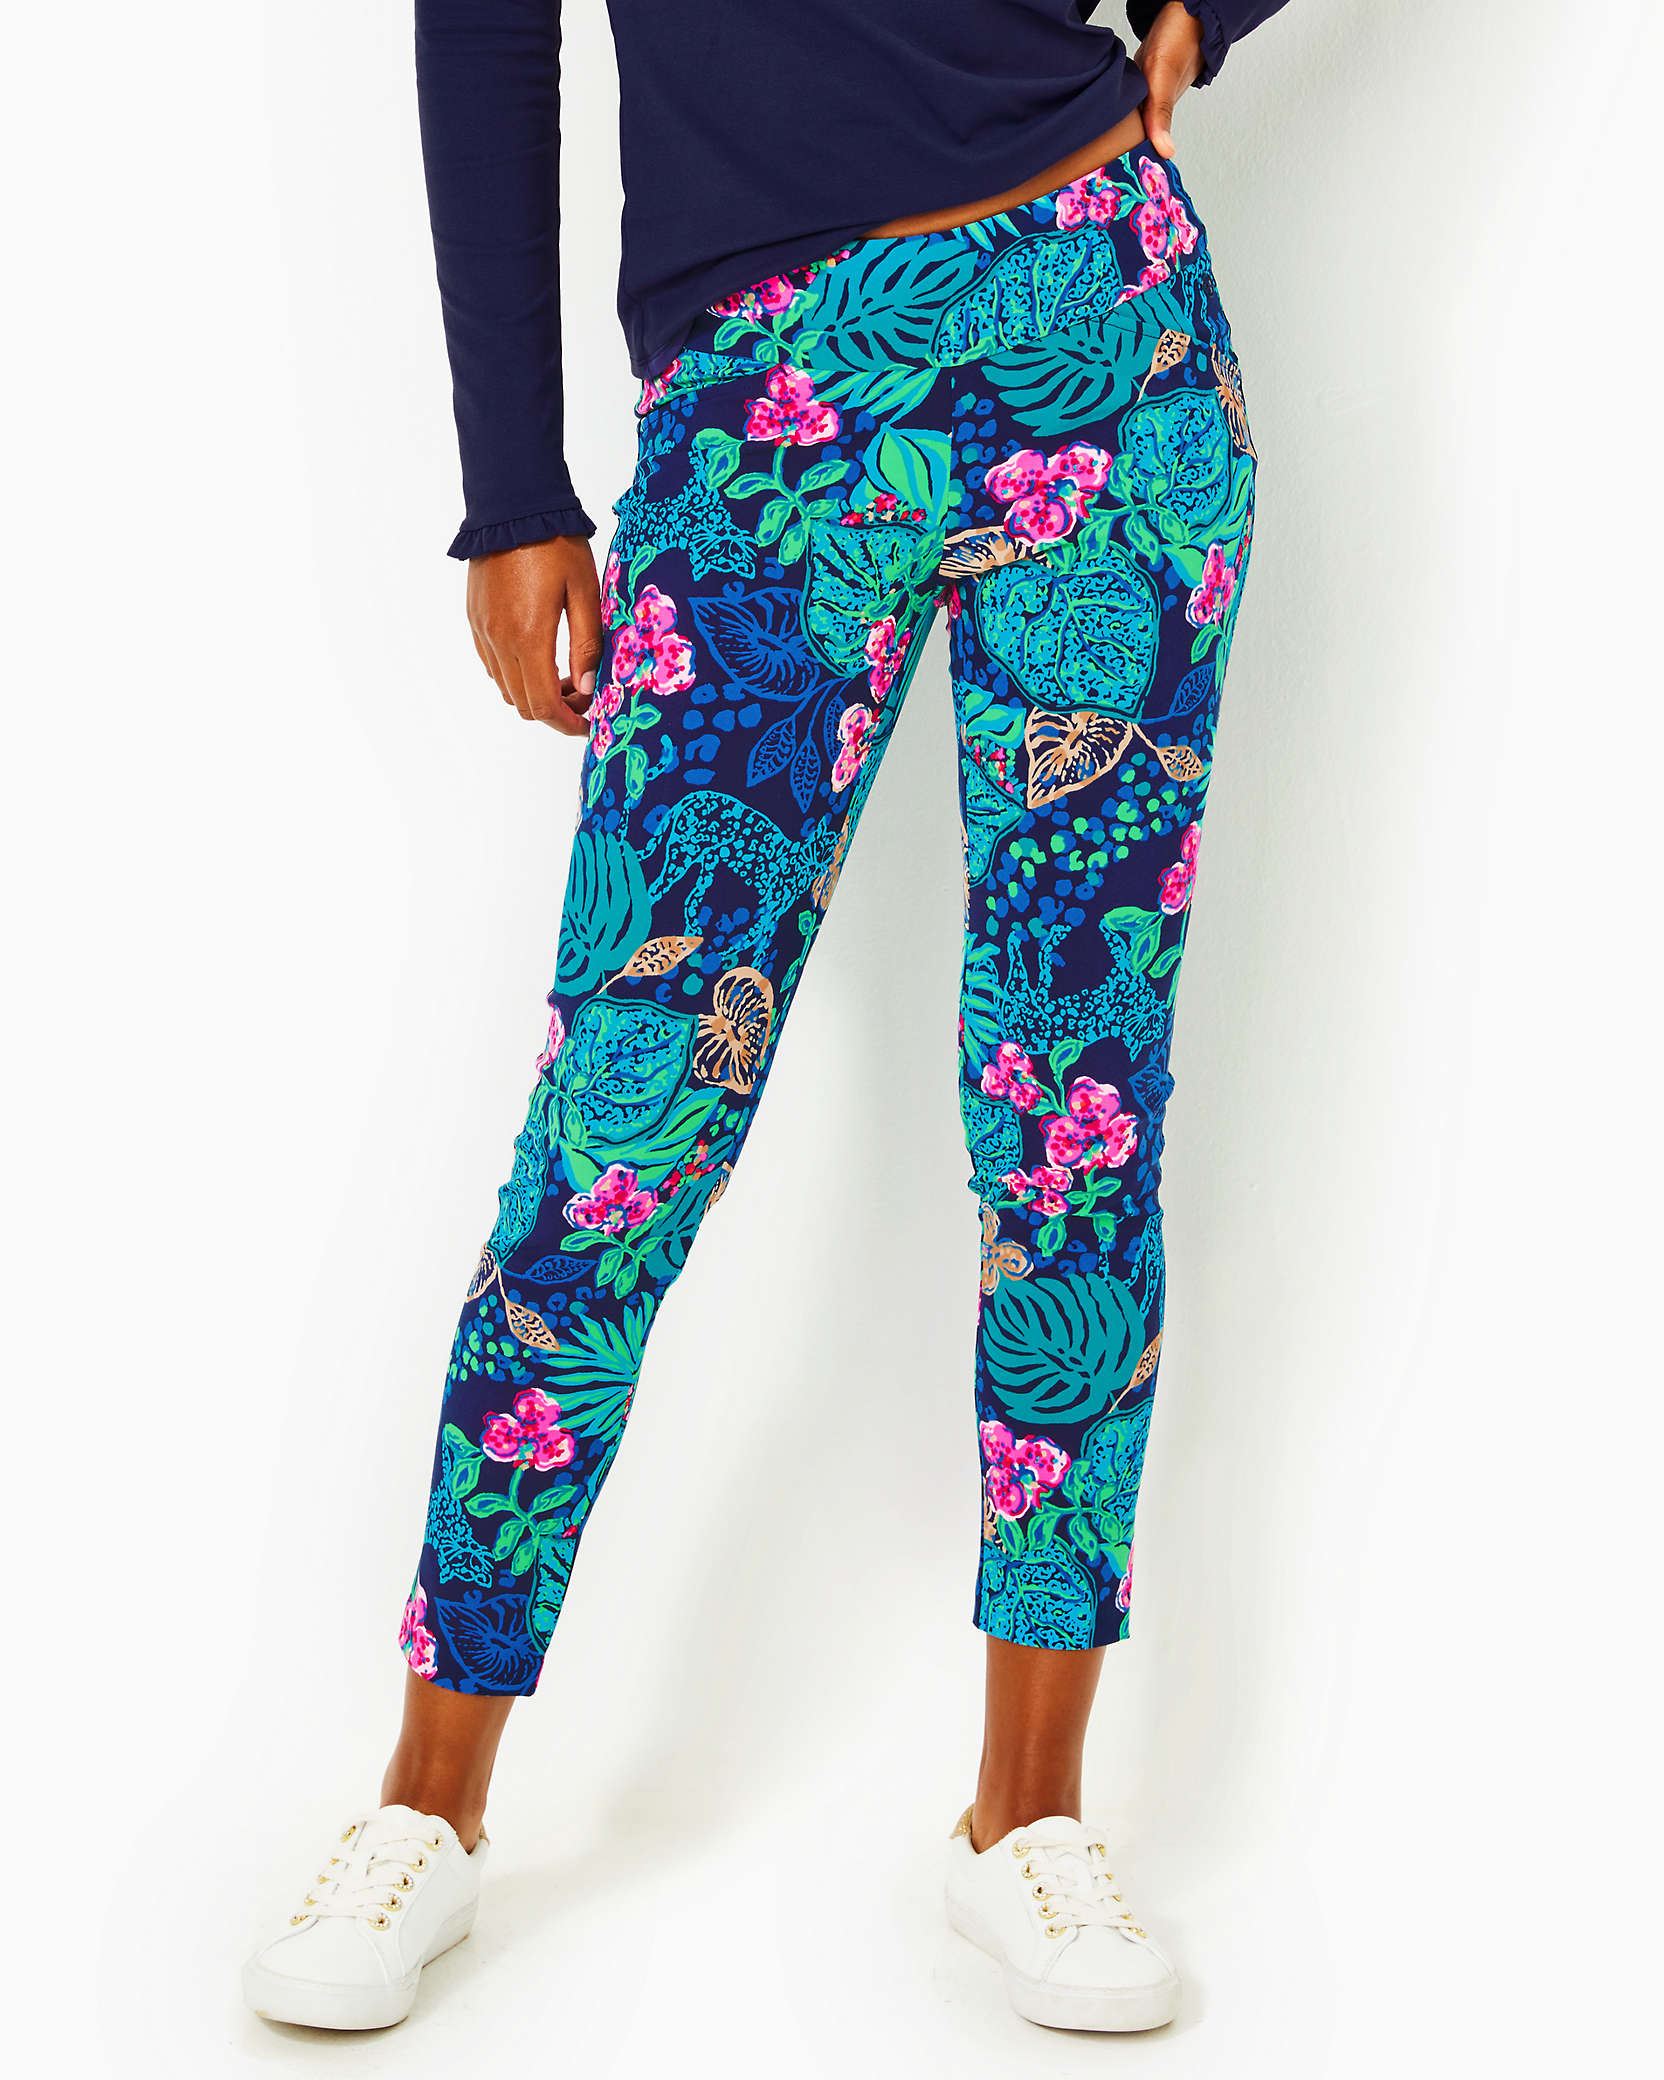 Shop Lilly Pulitzer Upf 50+ Luxletic 28" Corso Pant In Low Tide Navy Life Of The Party Golf